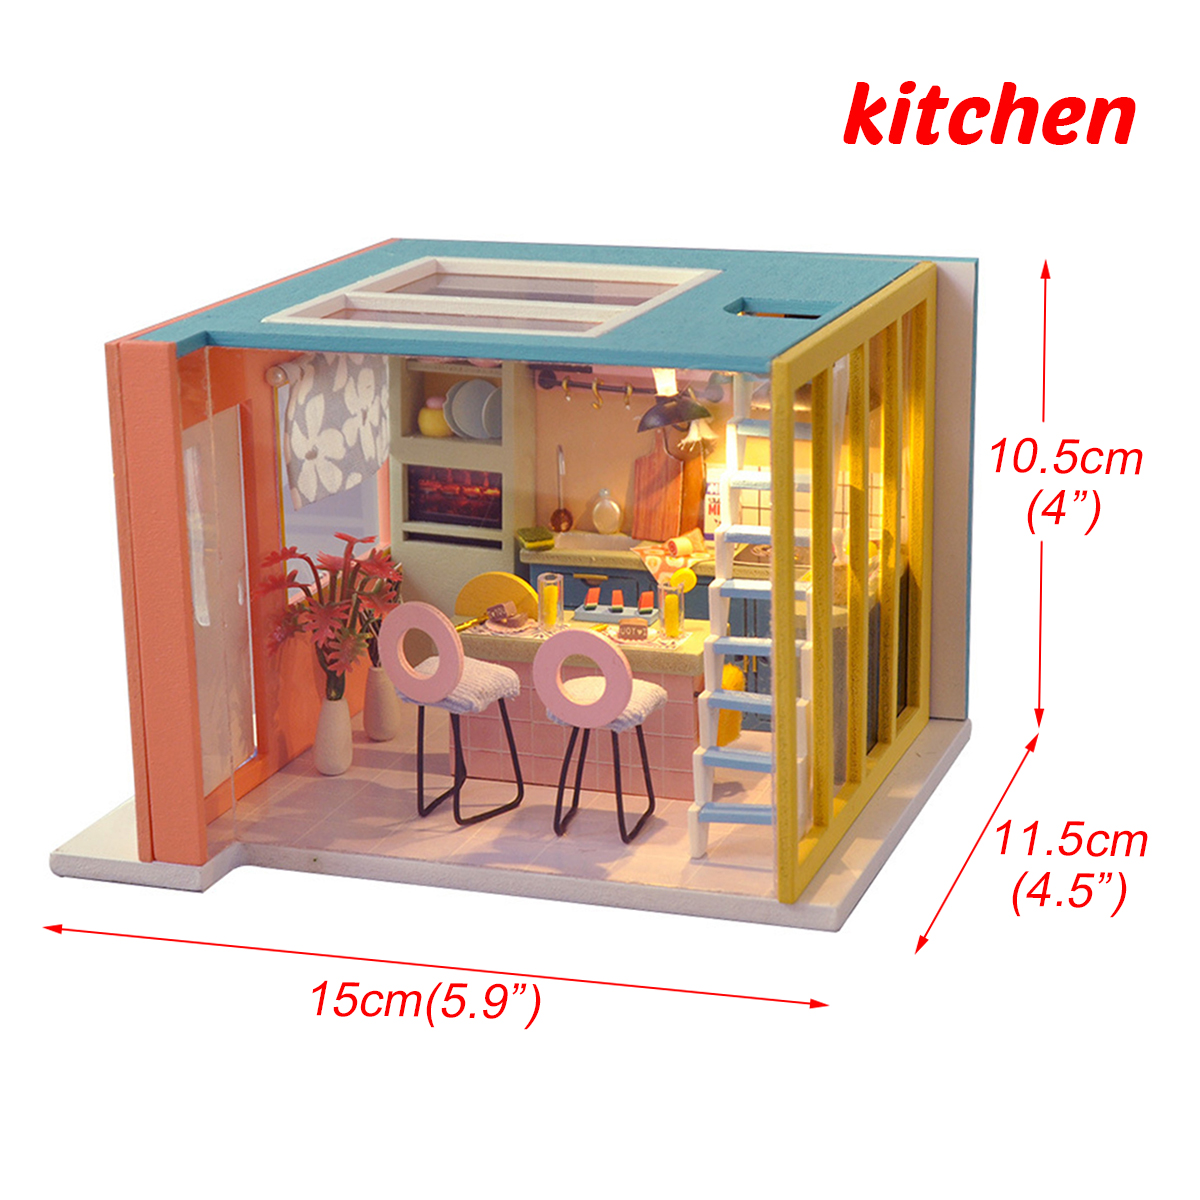 Wooden Kitchen DIY Handmade Assemble Doll House Miniature Furniture Kit Education Toy with LED Light for Kids Gift Collection - Photo: 4